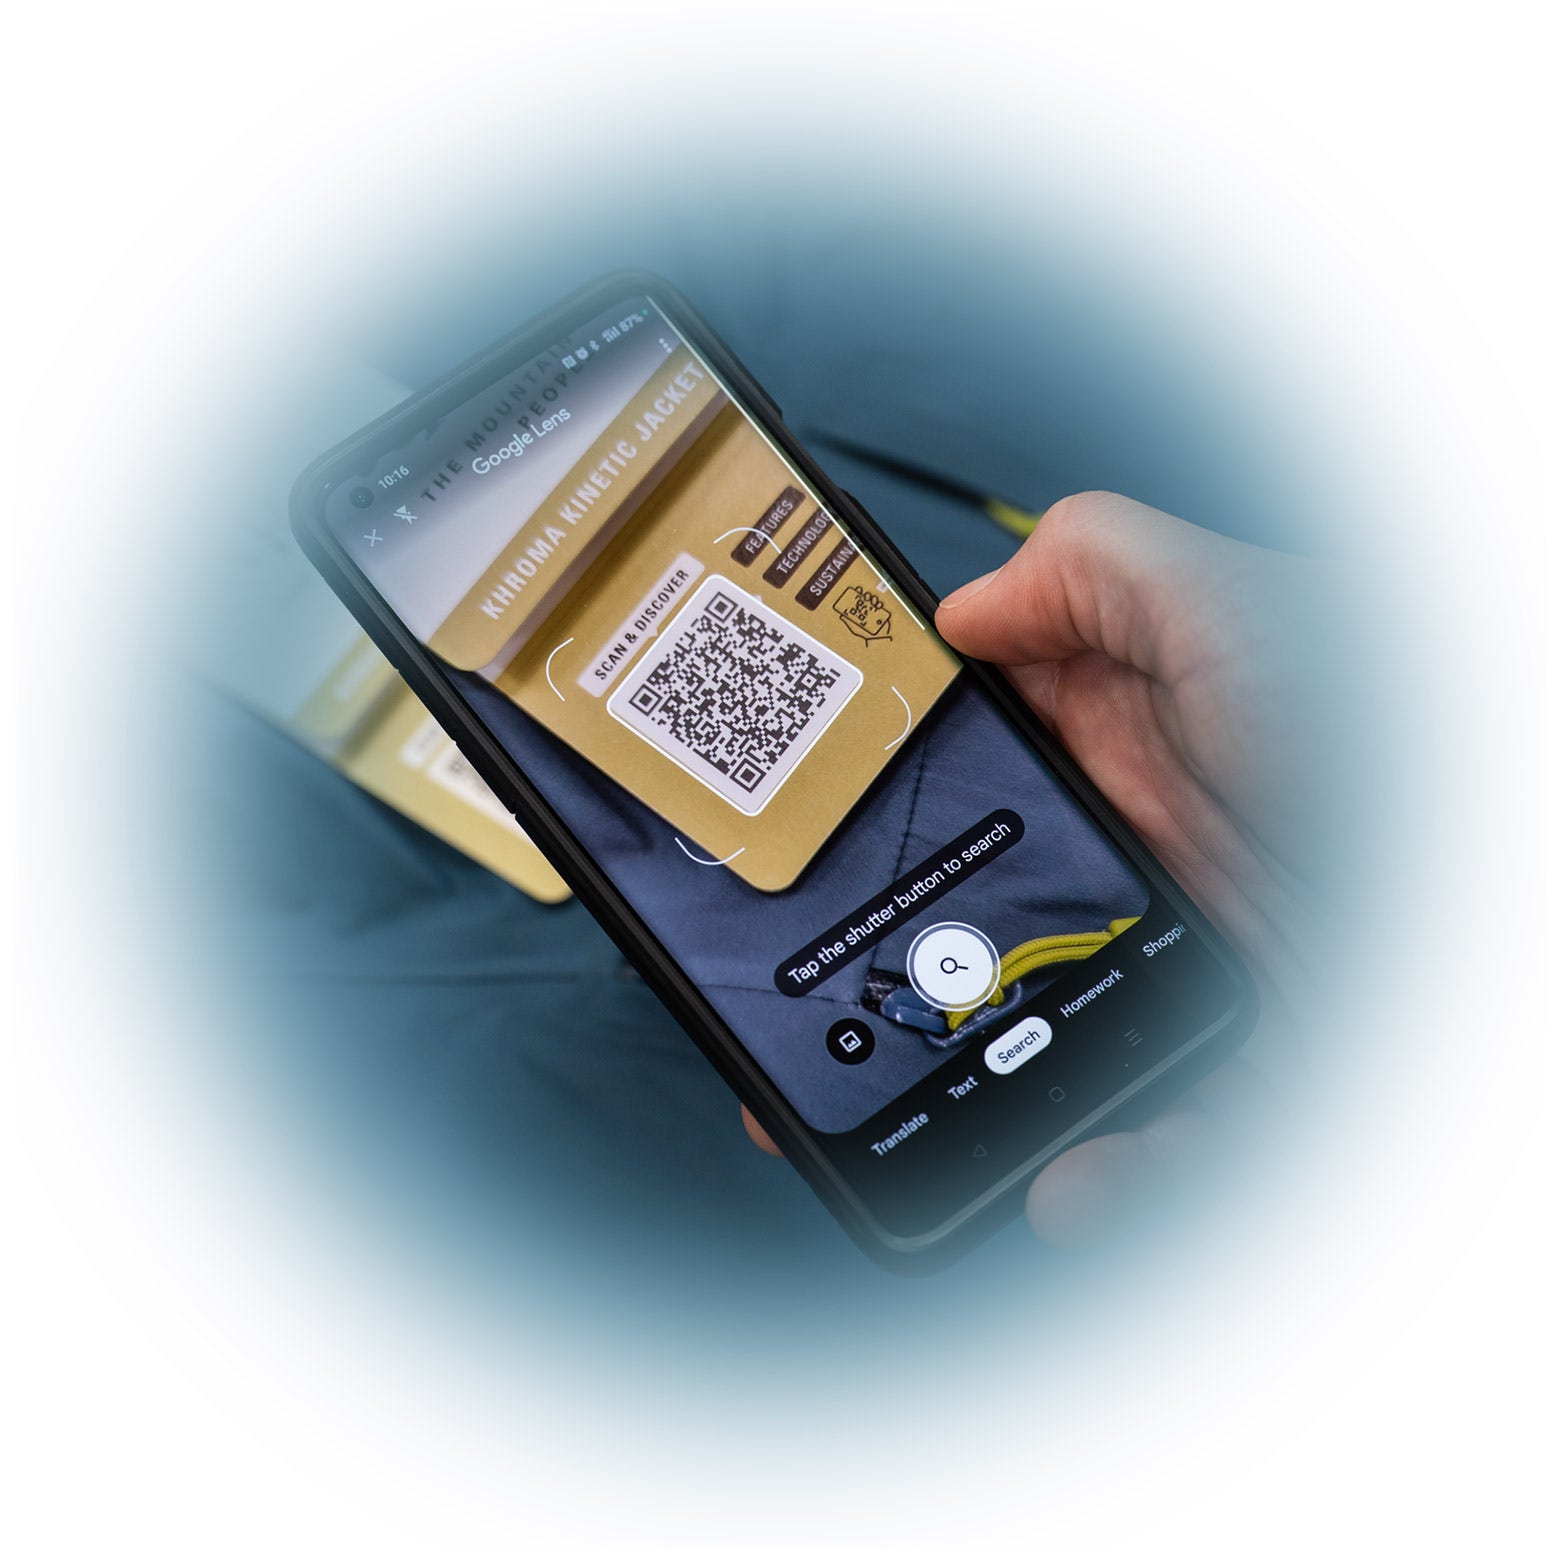 A smartphone scanning a QR code on a product hangtag, the image is contained in a circle